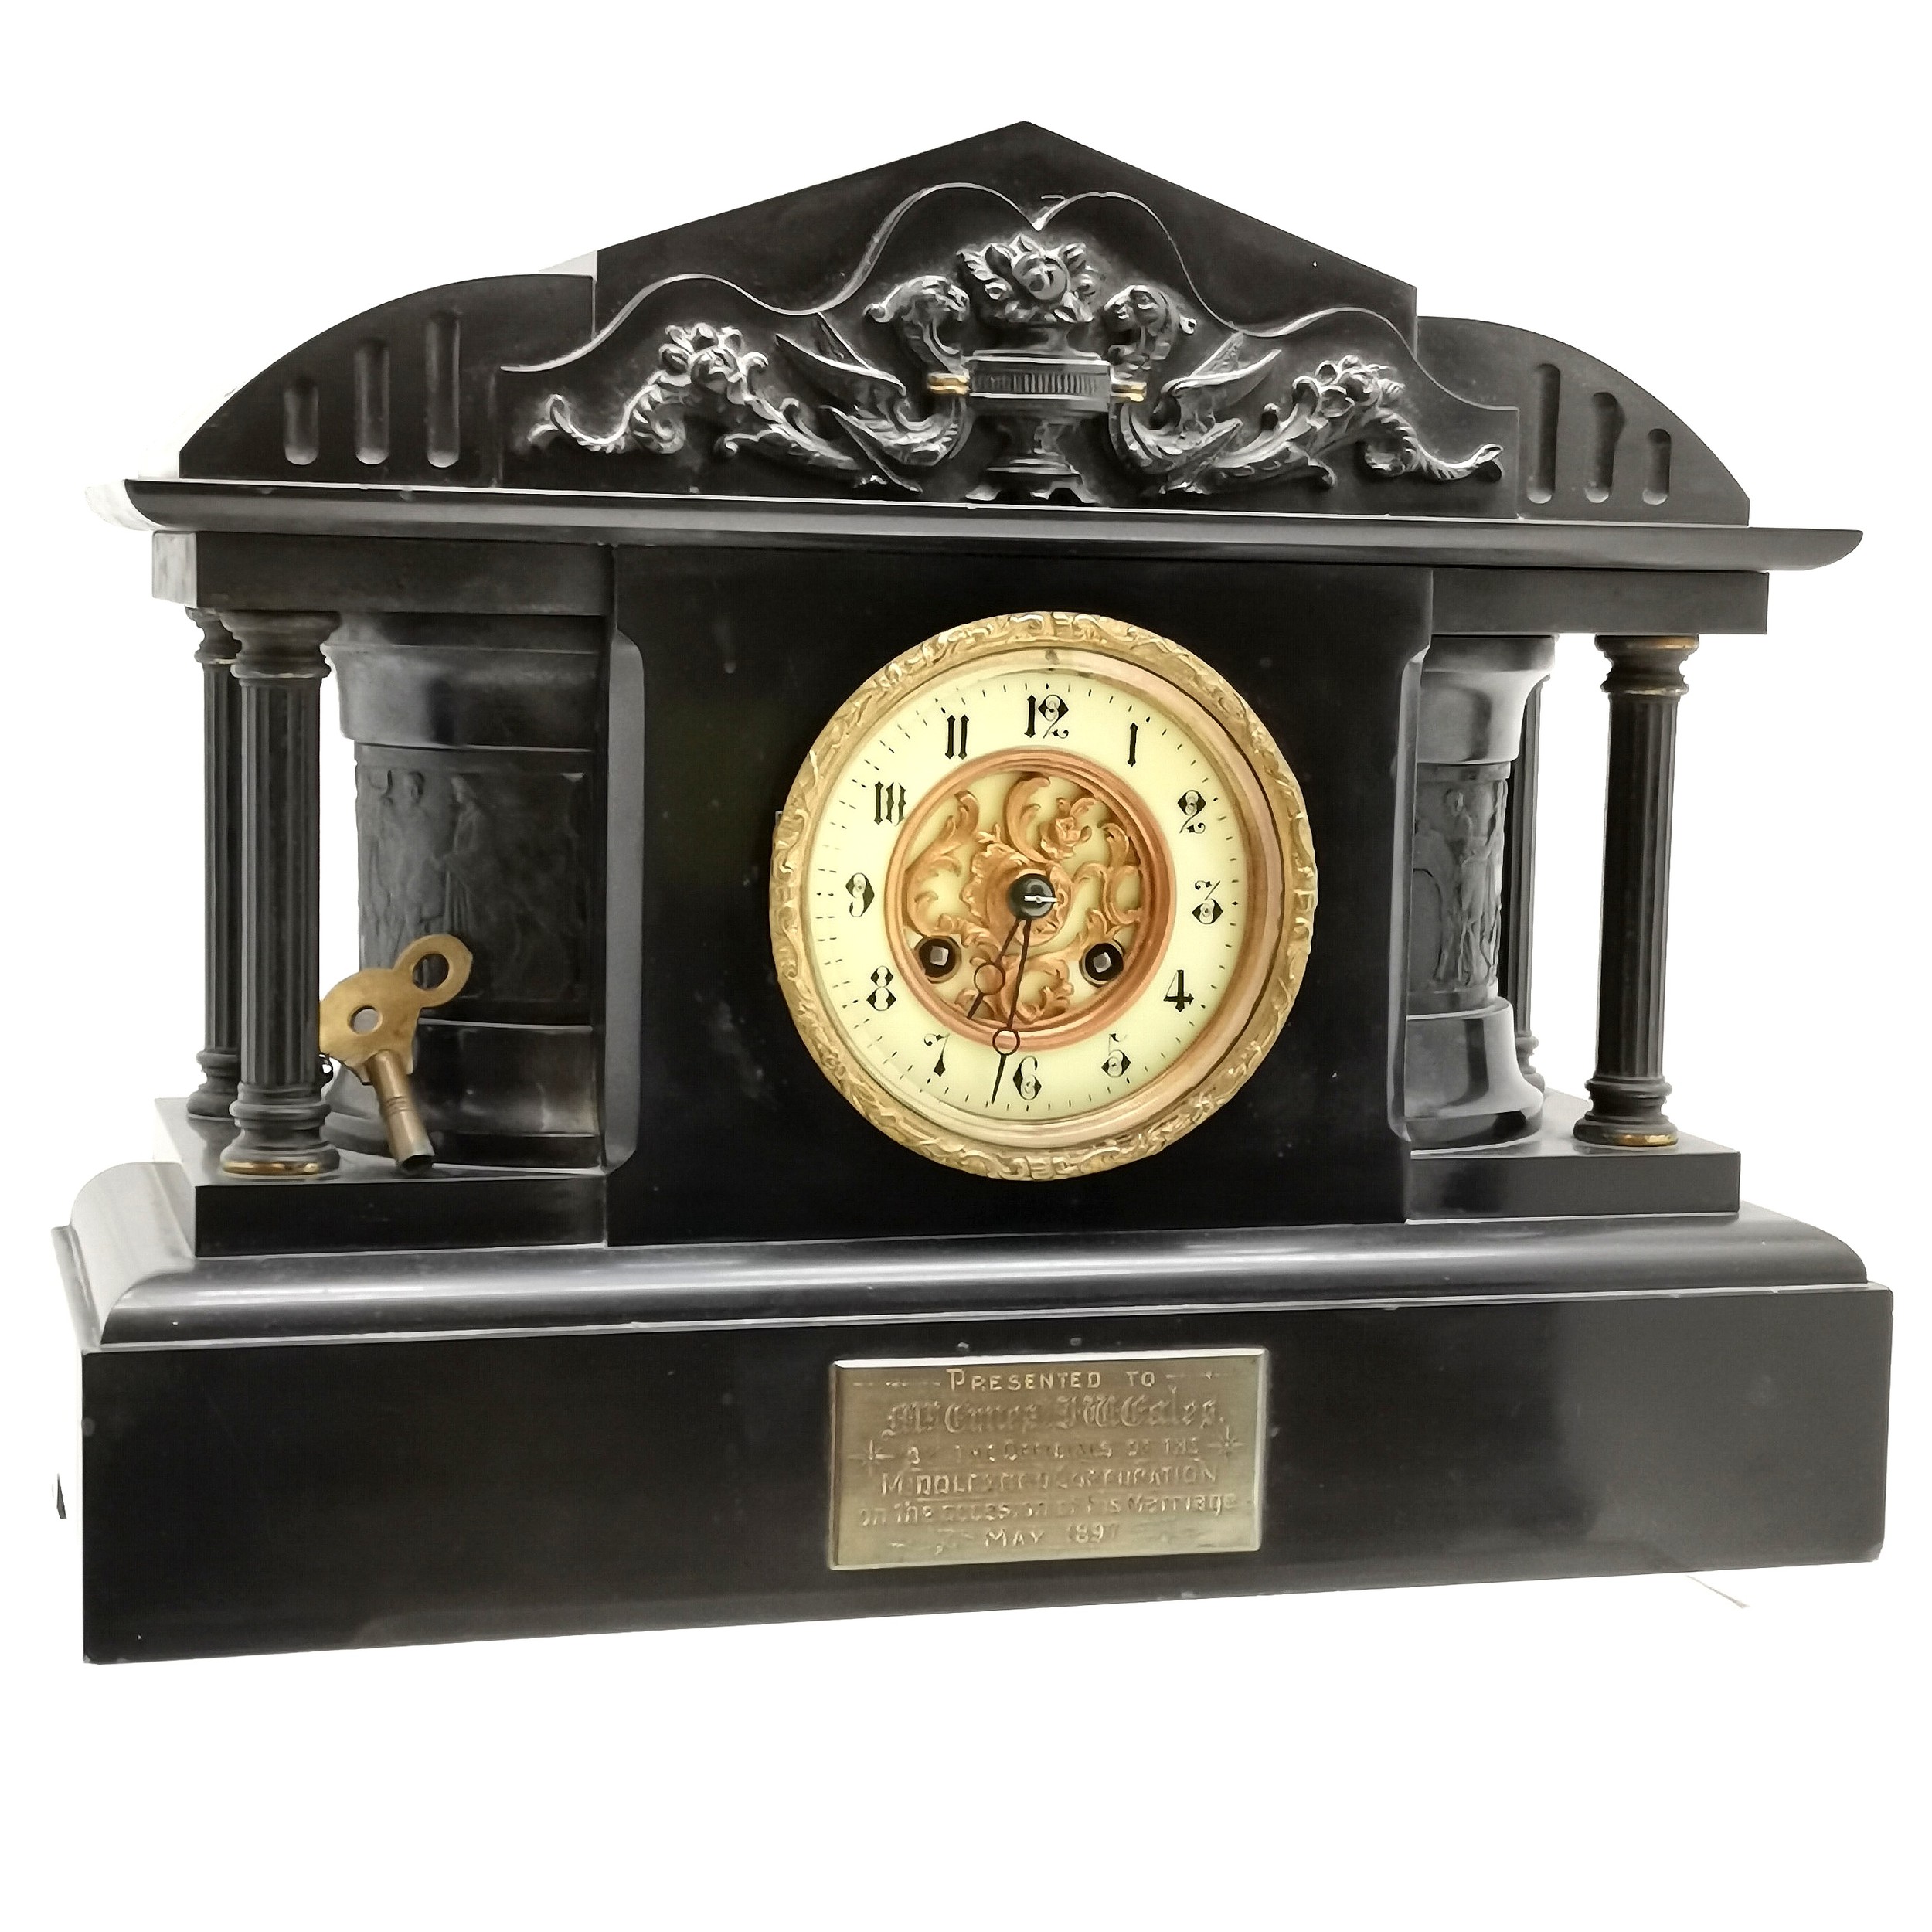 Victorian slate mantle clock, decorated with classic scenes and columns, 37.5cm wide x 32cm high x